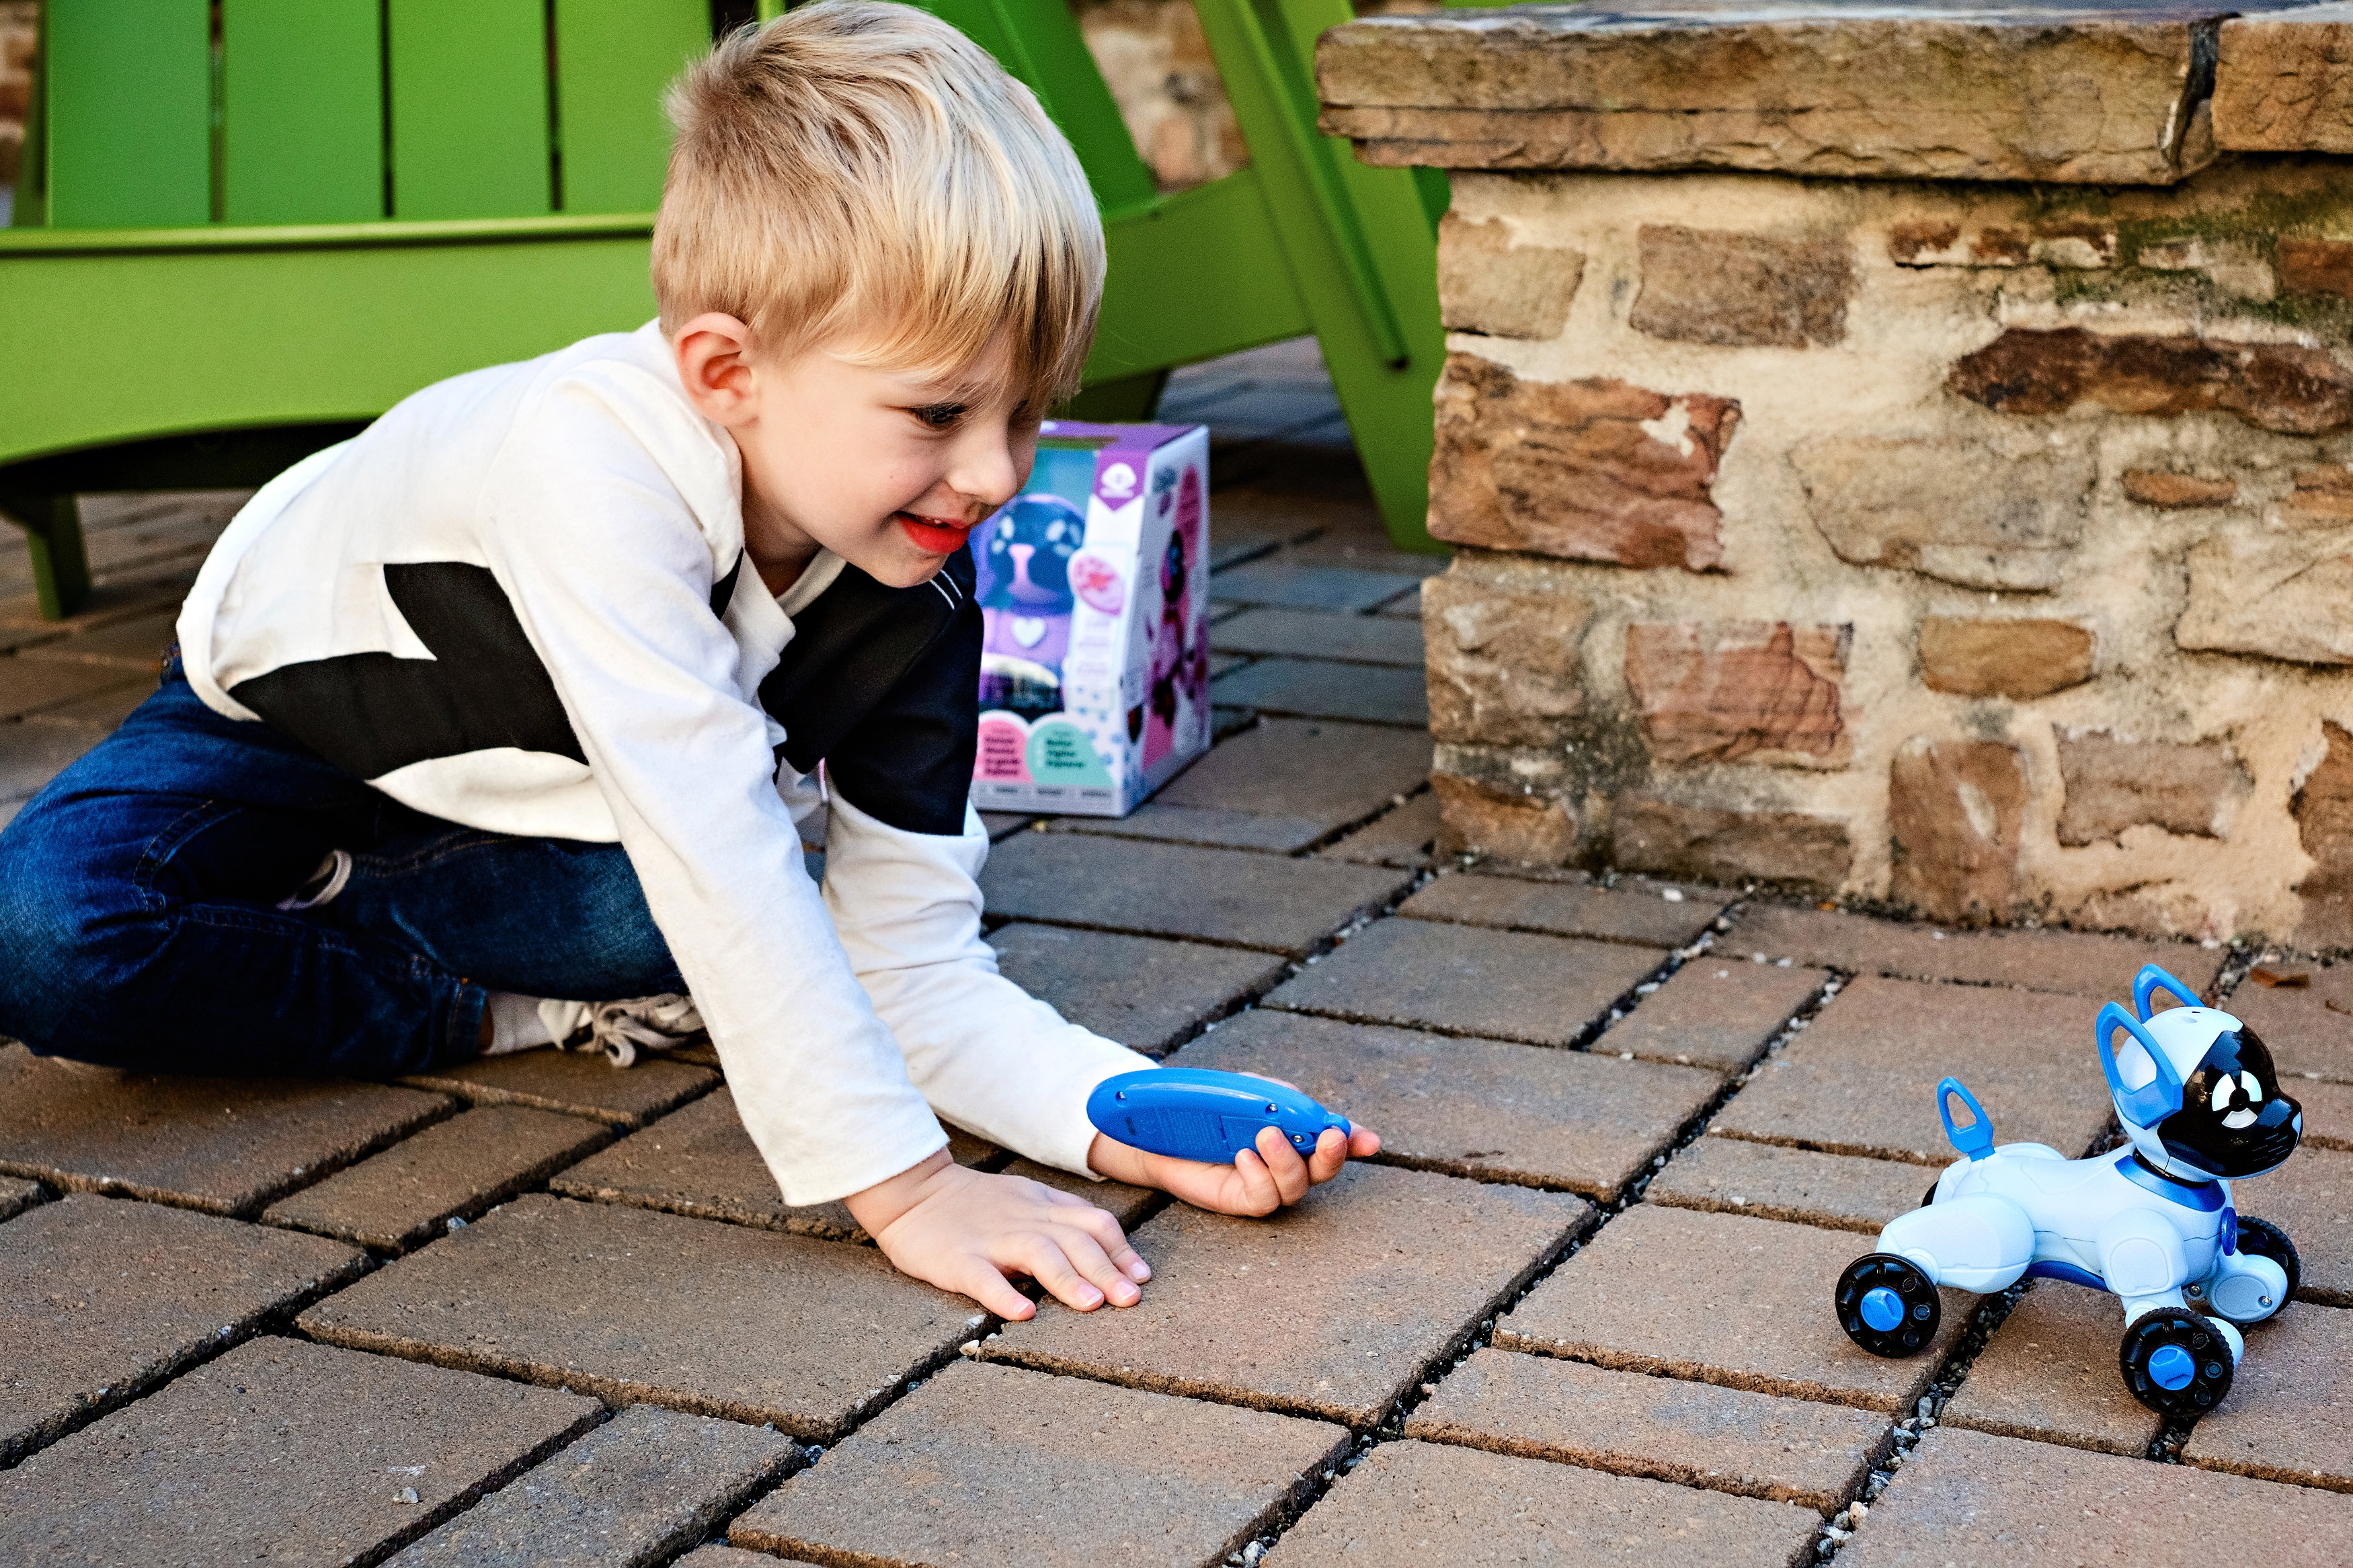 The Best Electronic Toy for Christmas by Atlanta lifestyle blogger Happily Hughes